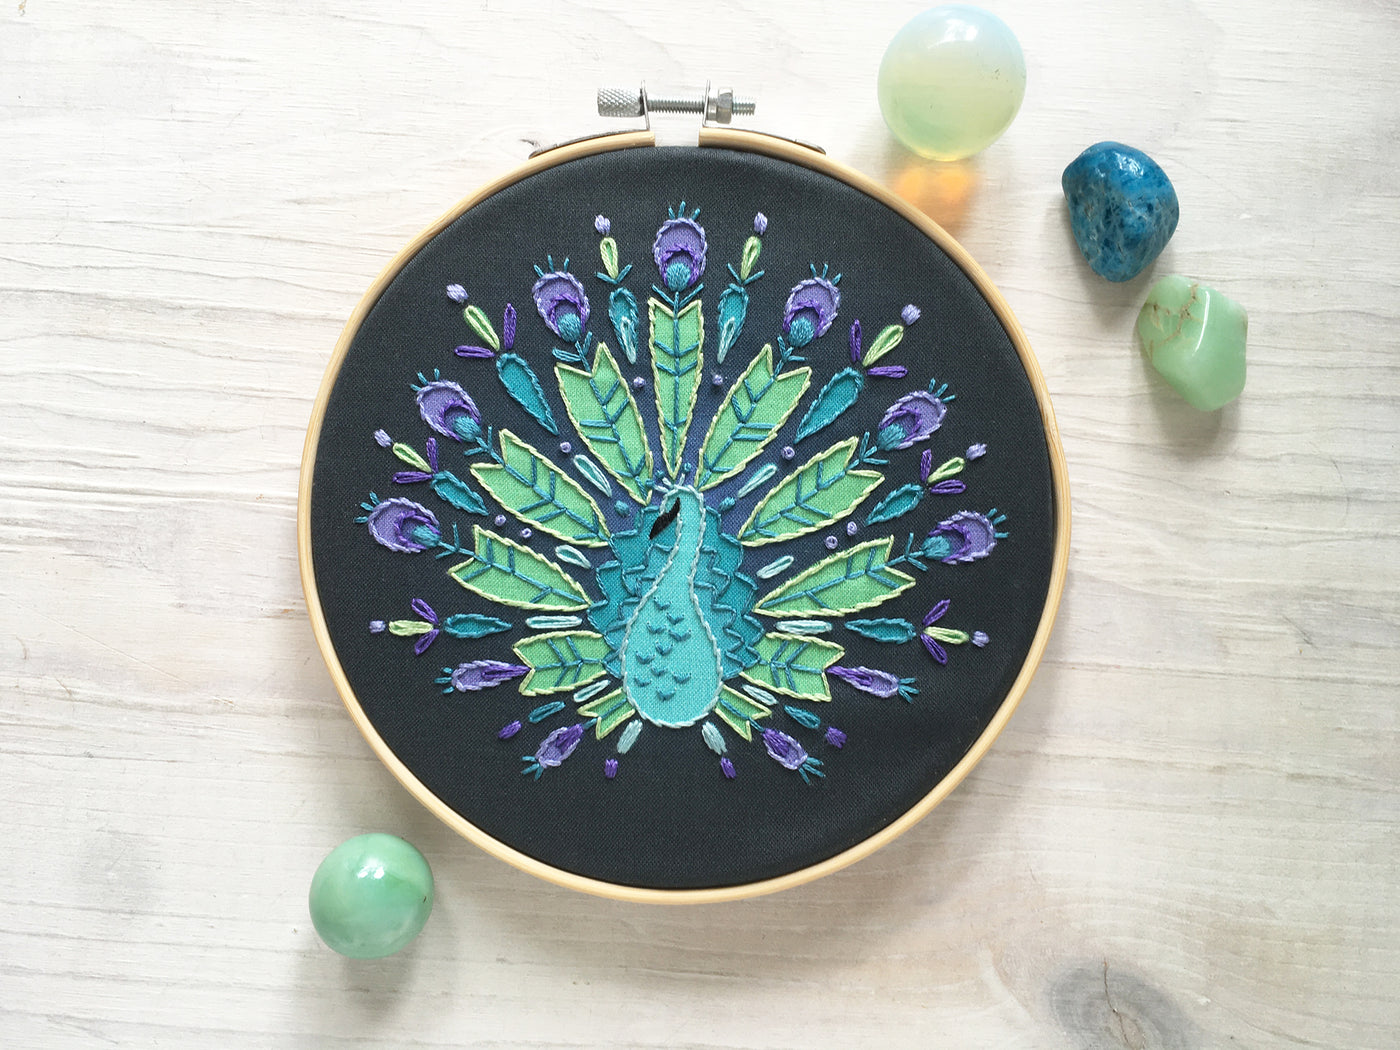 Peacock Mandala Hand Embroidery pattern download